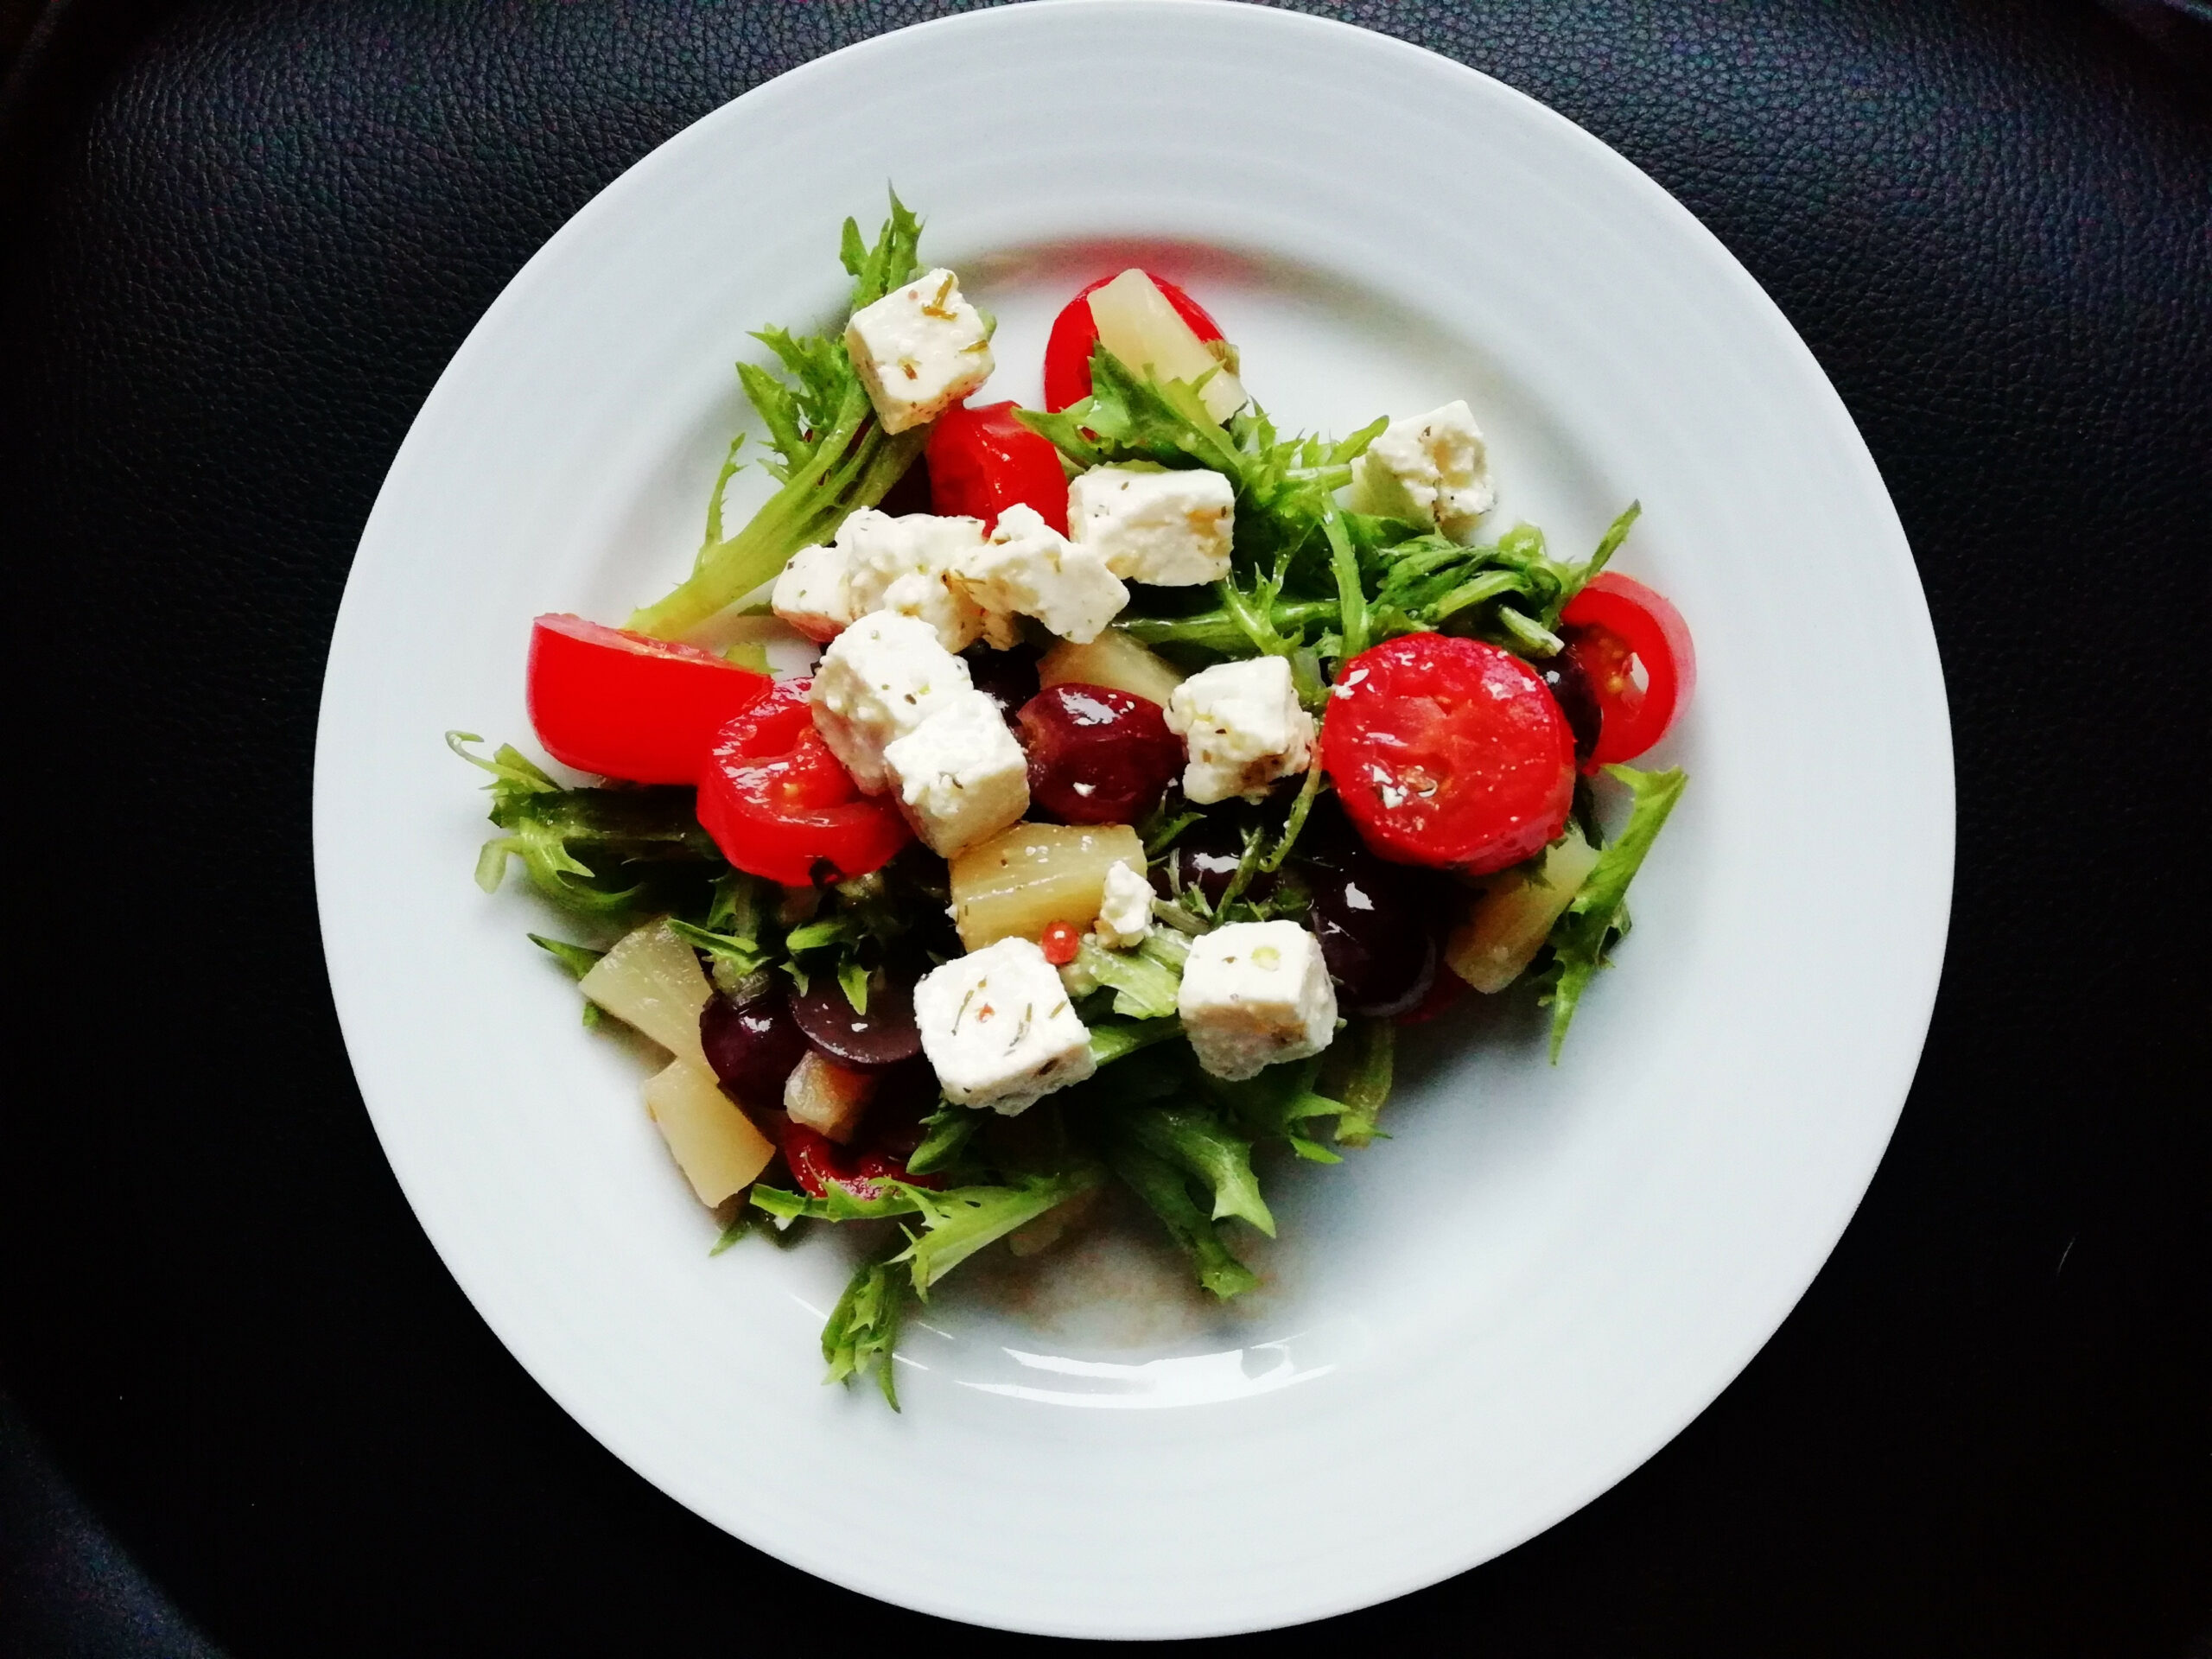 Pear and goat cheese salad in a dish